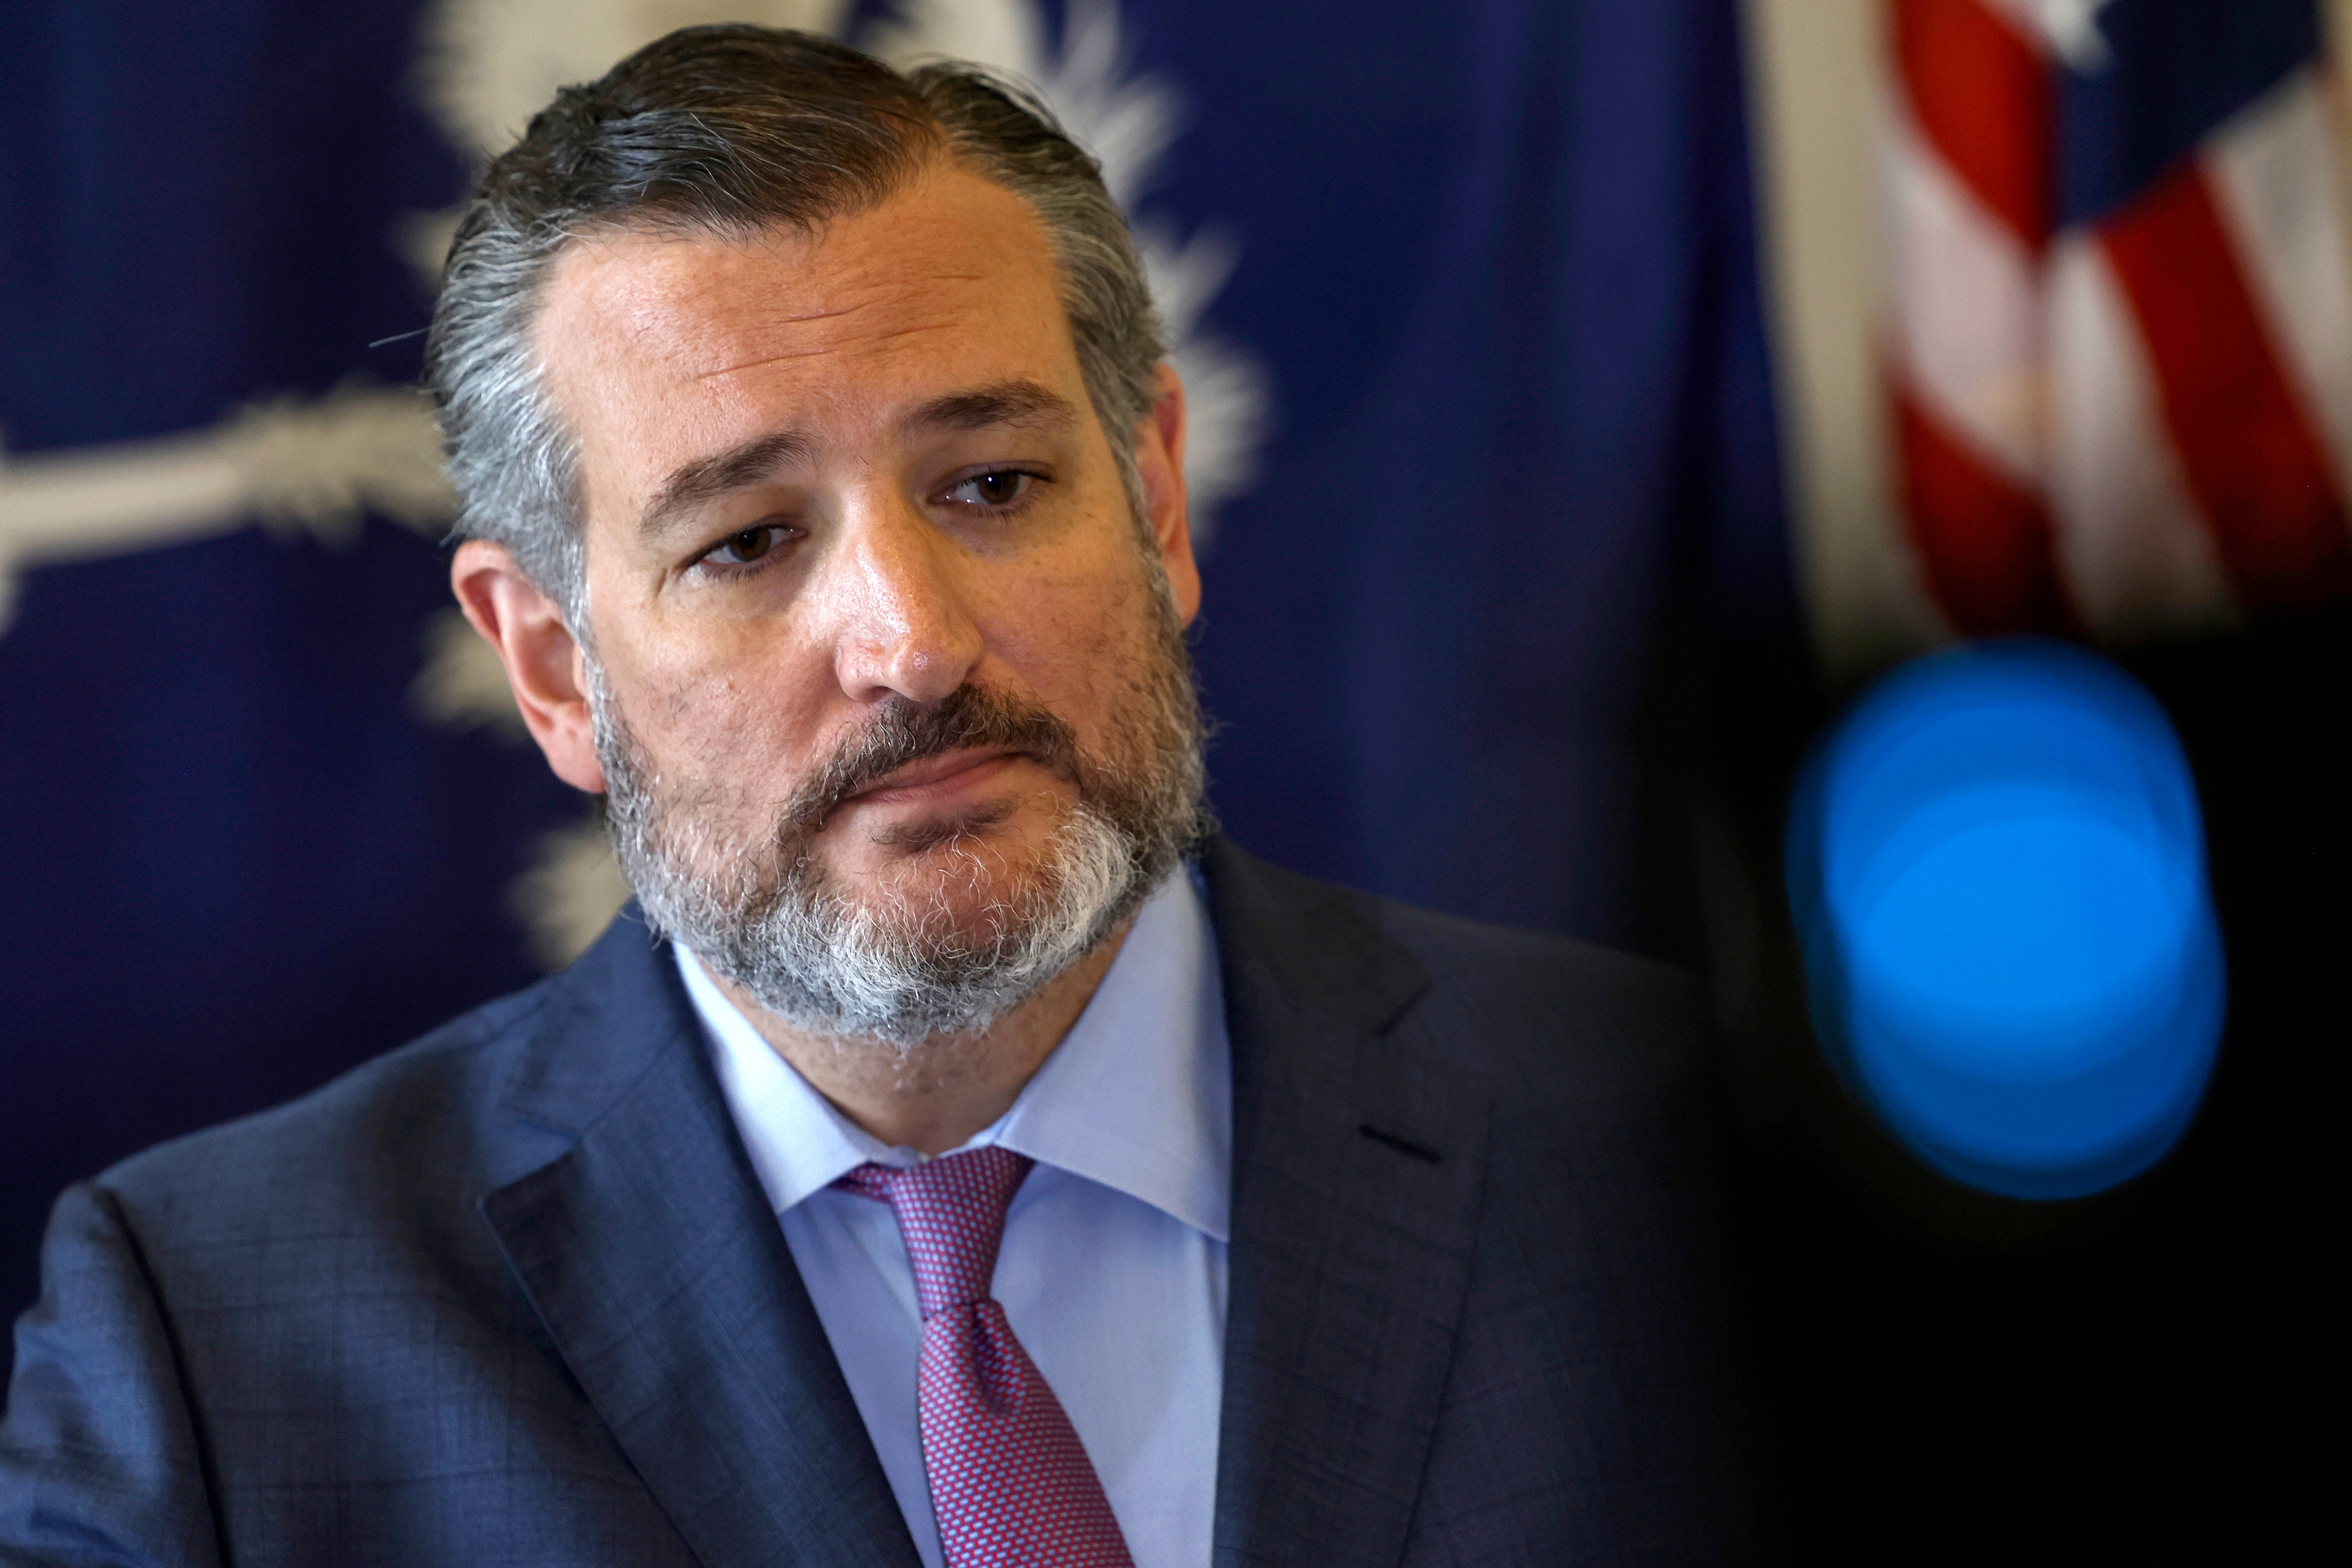 Ted Cruz said he thinks the federal right to same-sex marriage should be overturned